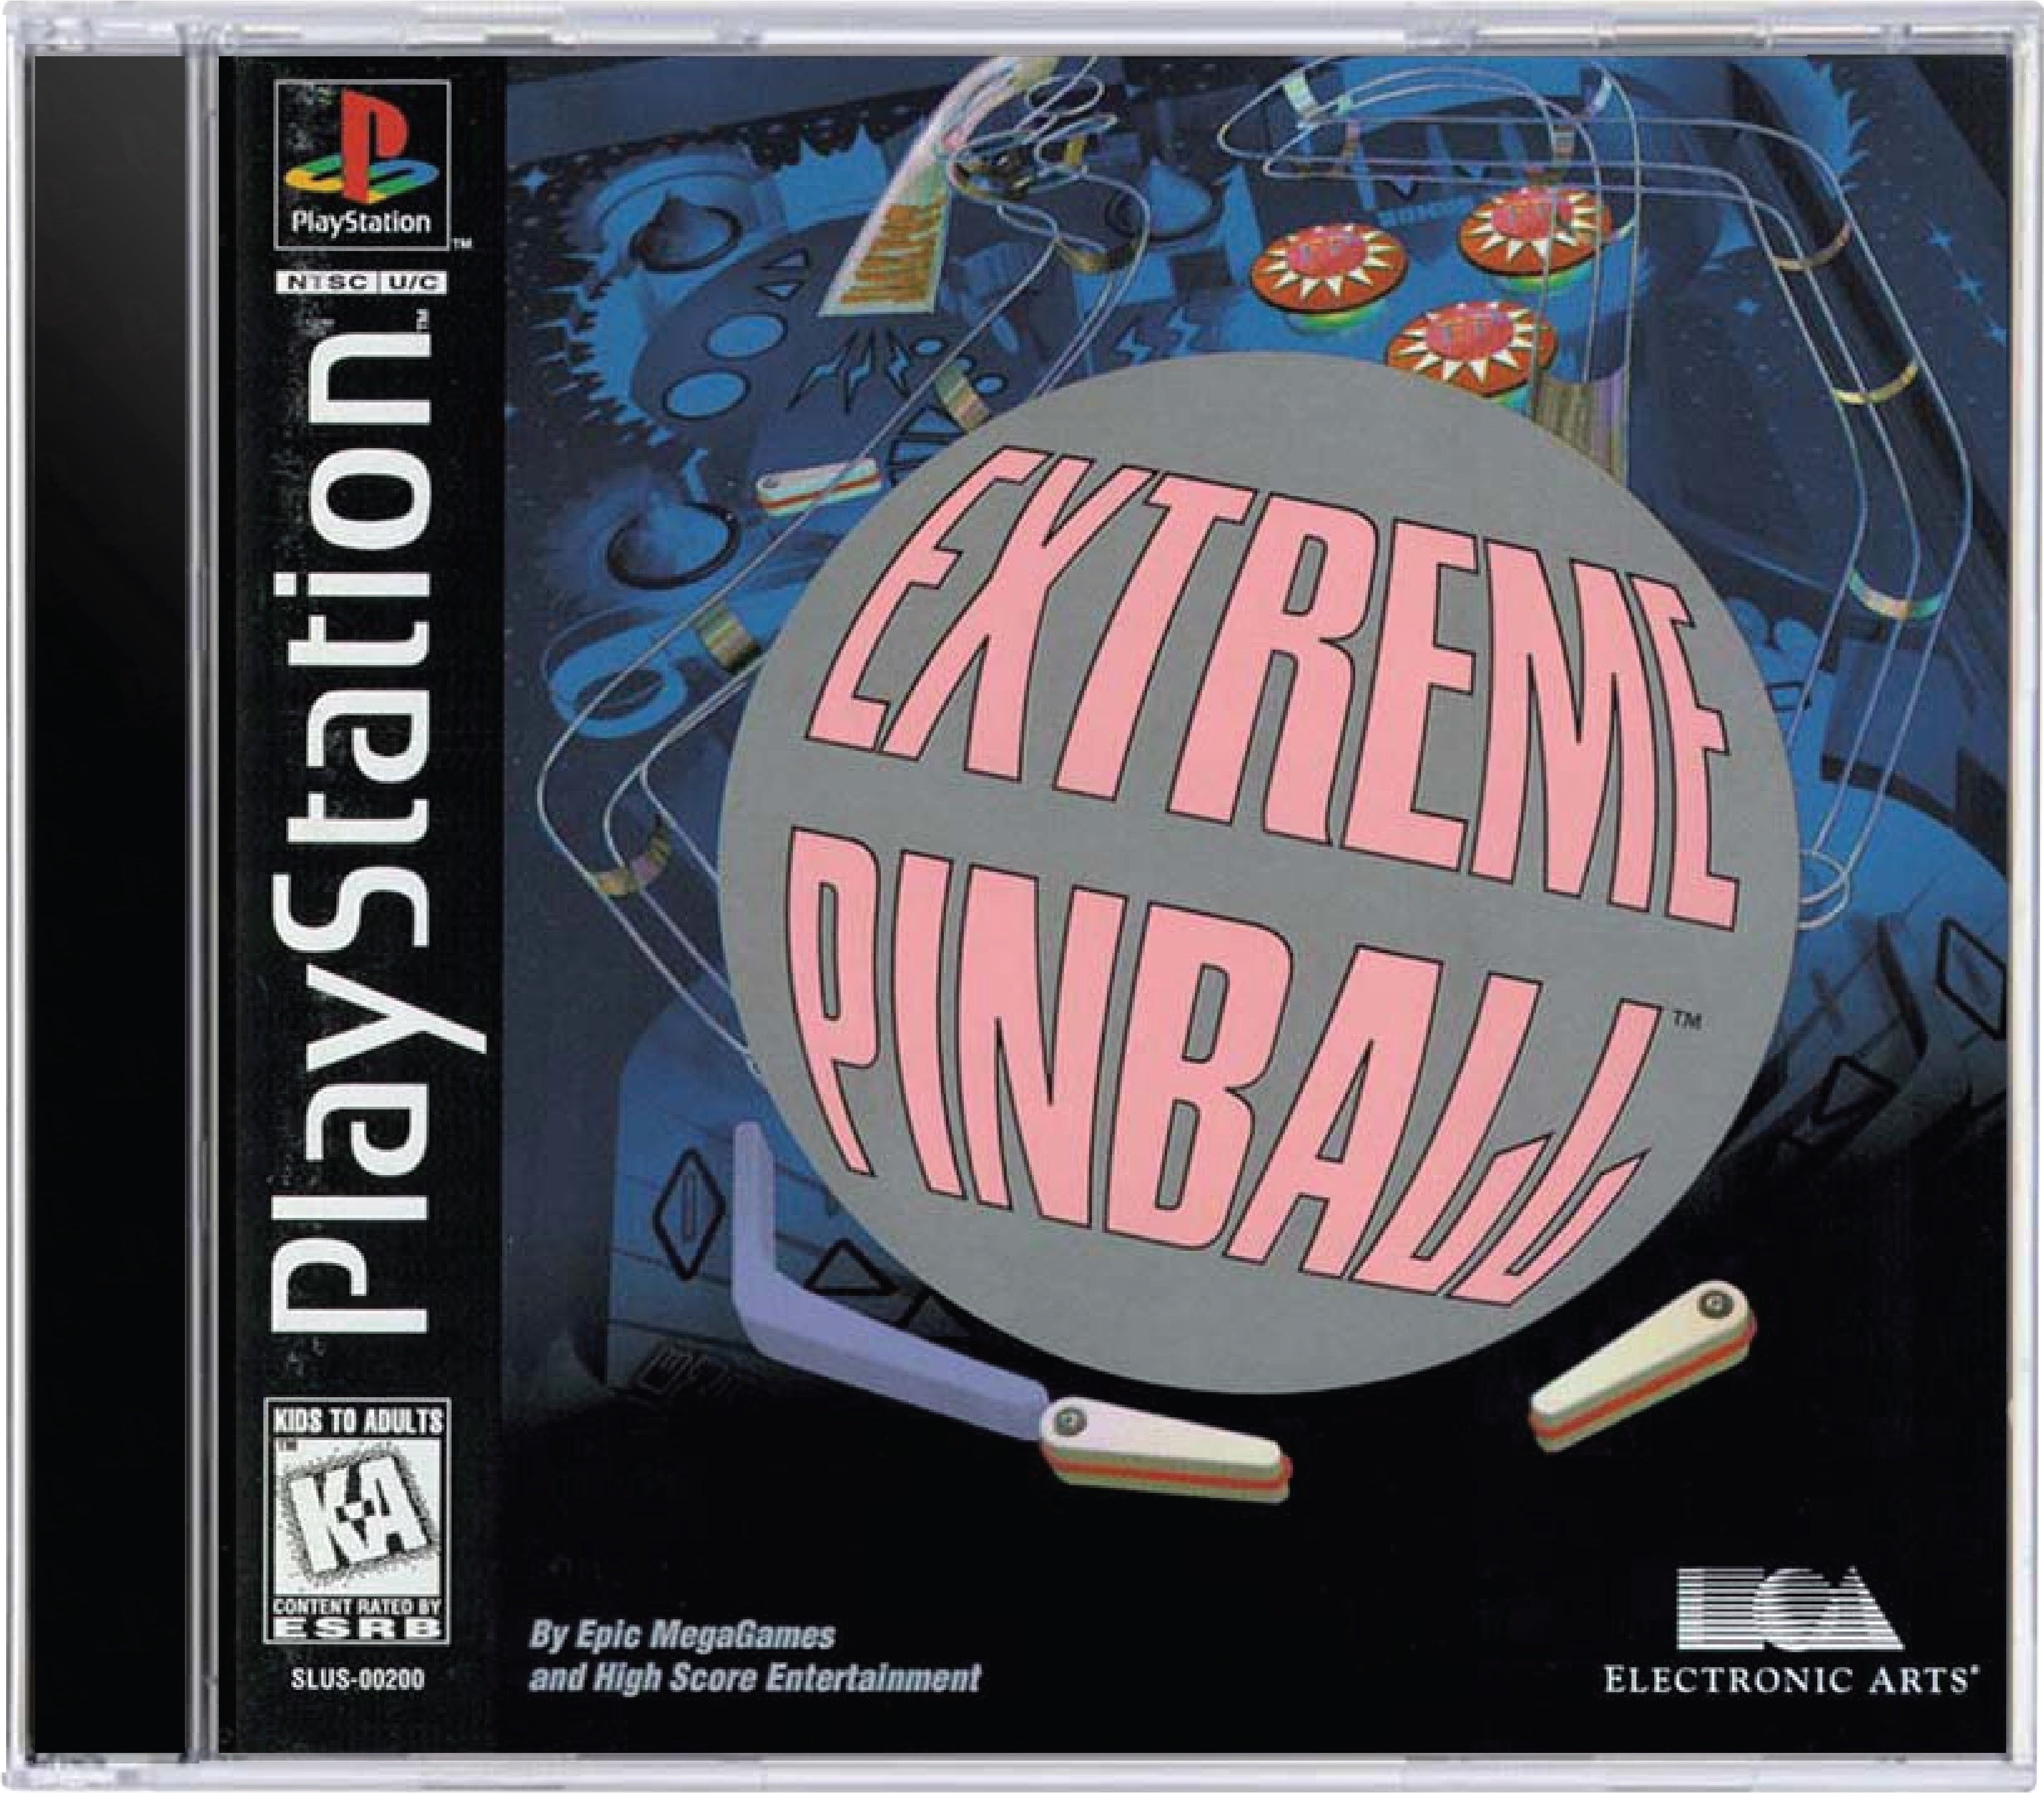 Extreme Pinball Cover Art and Product Photo